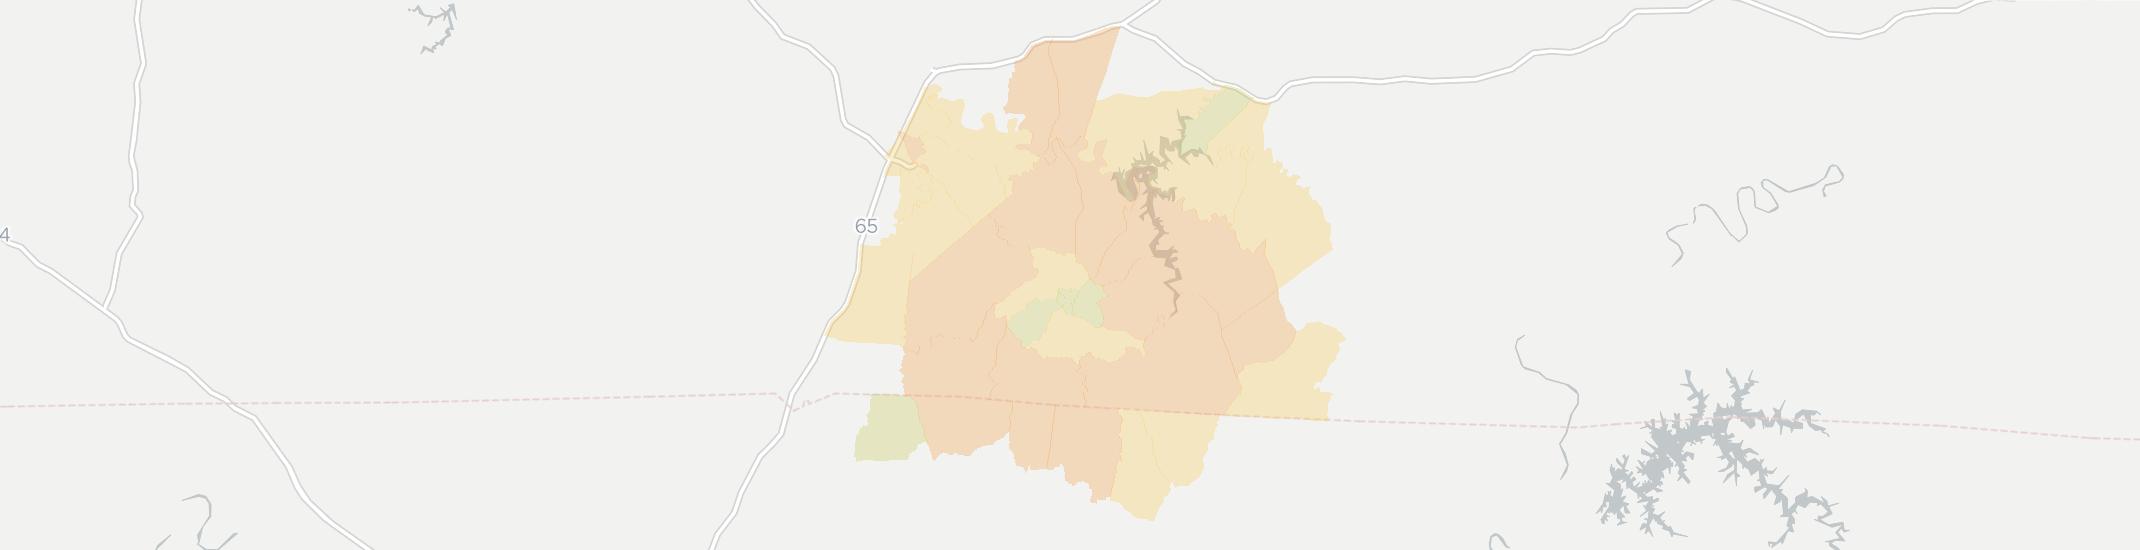 Scottsville Internet Competition Map. Click for interactive map.